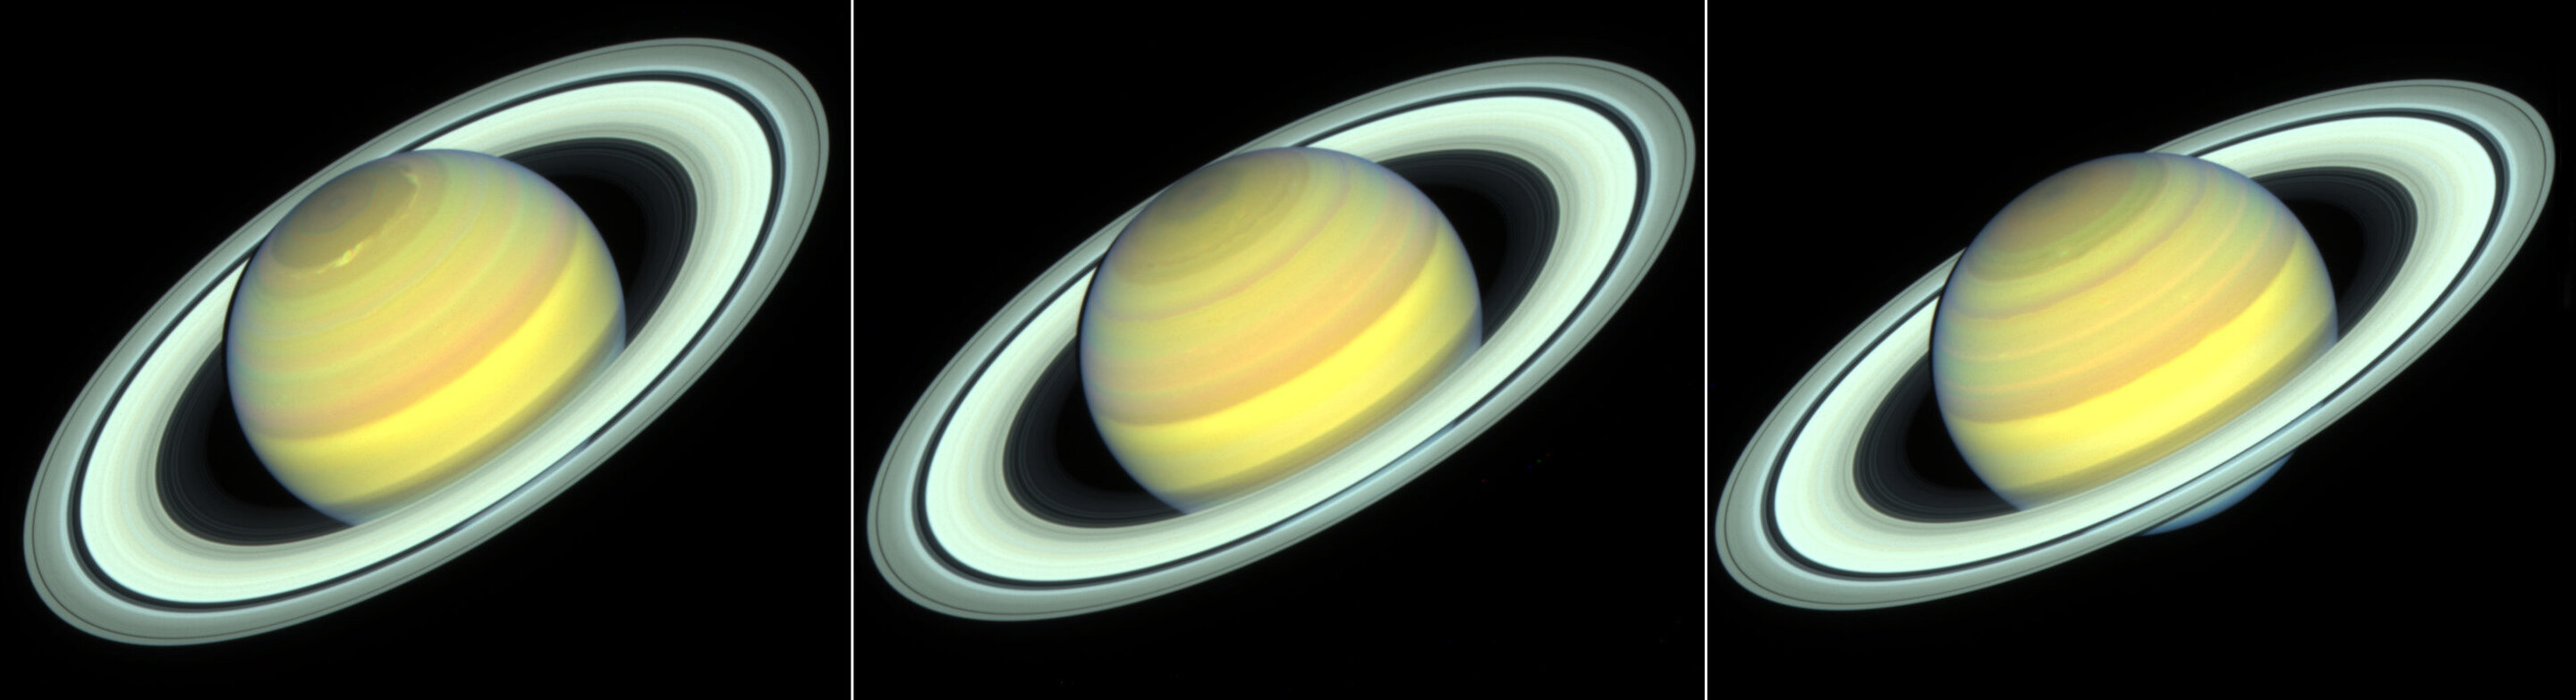 Hubble sees a change of seasons on Saturn